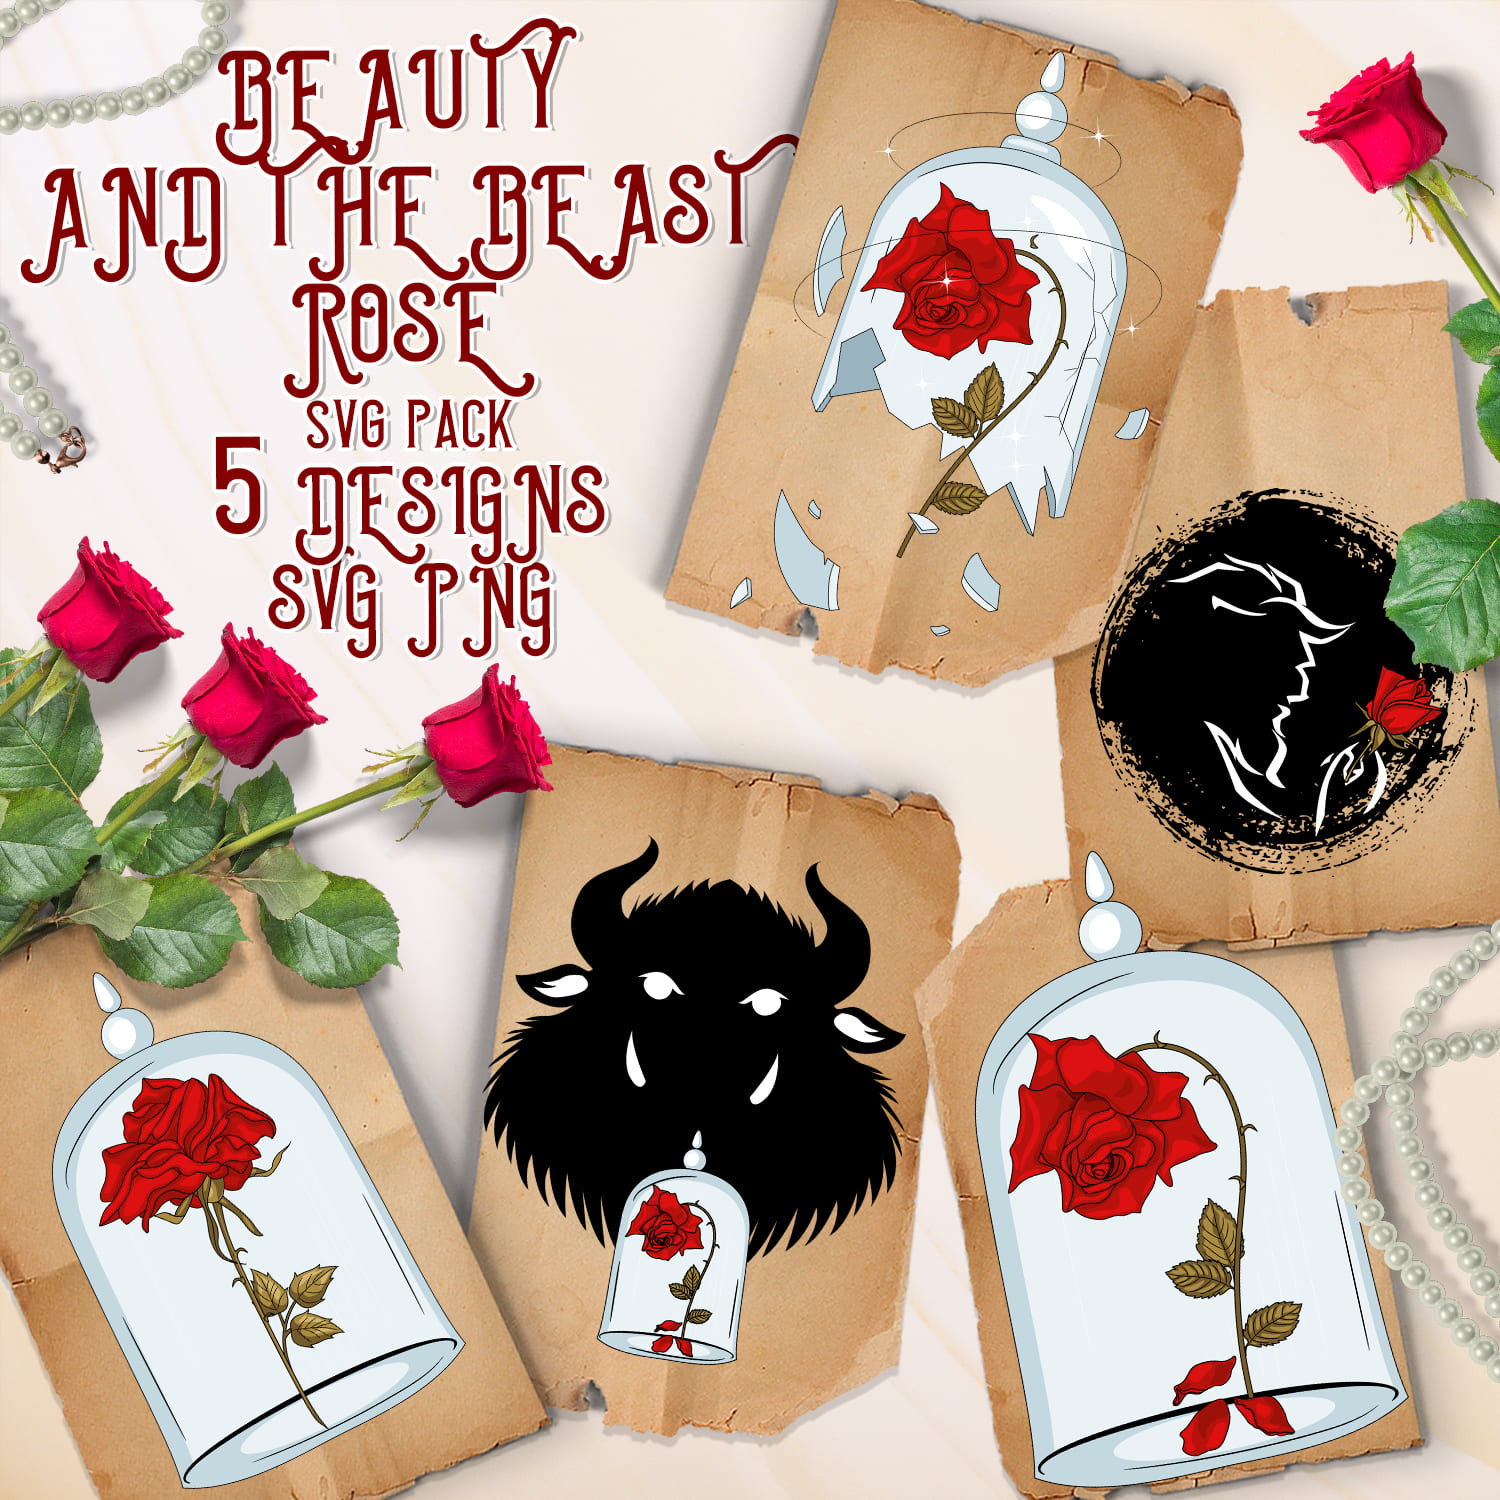 Beauty And The Beast Rose Svg.